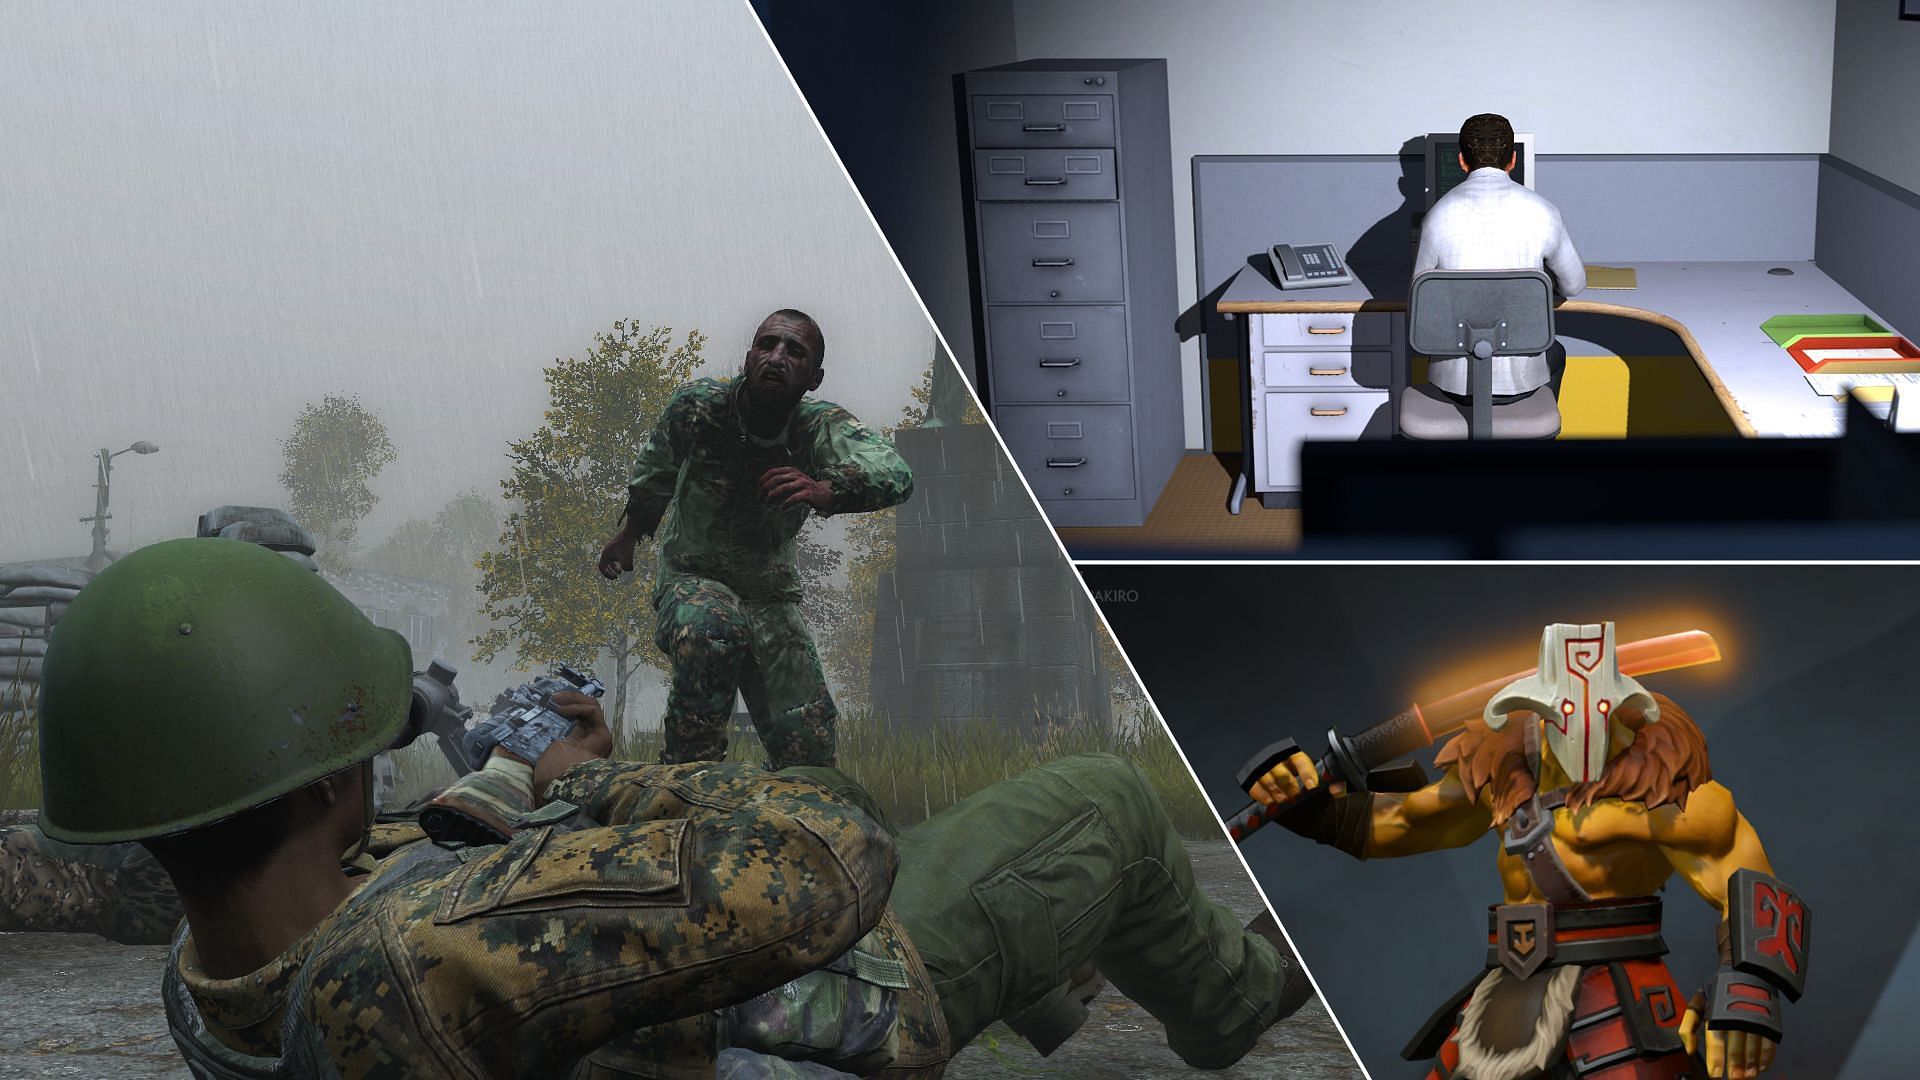 Collage of DayZ, Dota 2 and The Stanley Parable